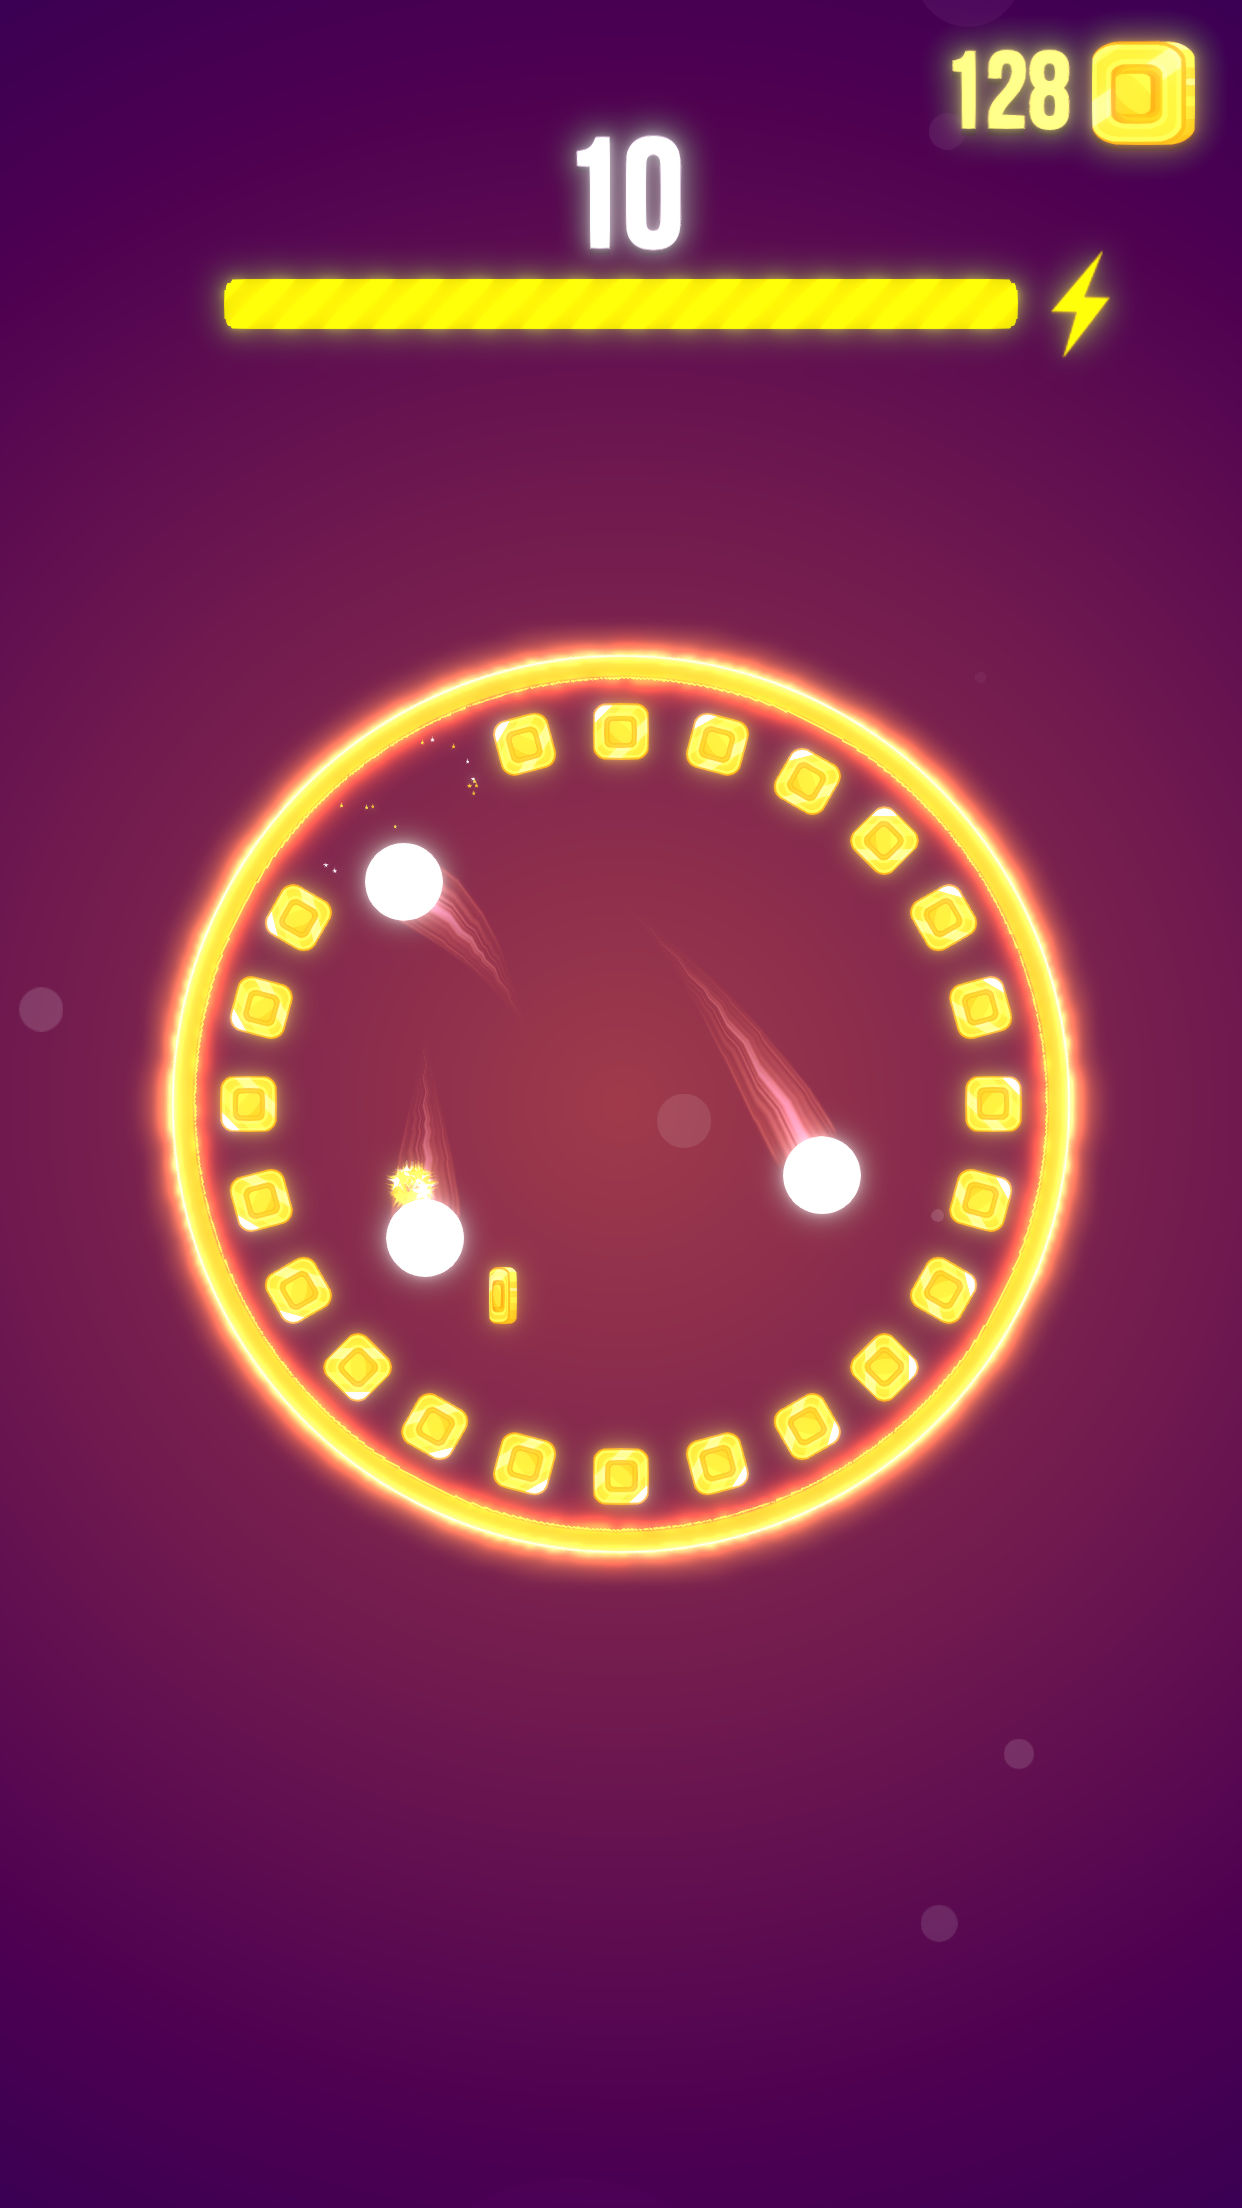 Crazy Ball Game Apple AppStore - Google Play Store Image 2